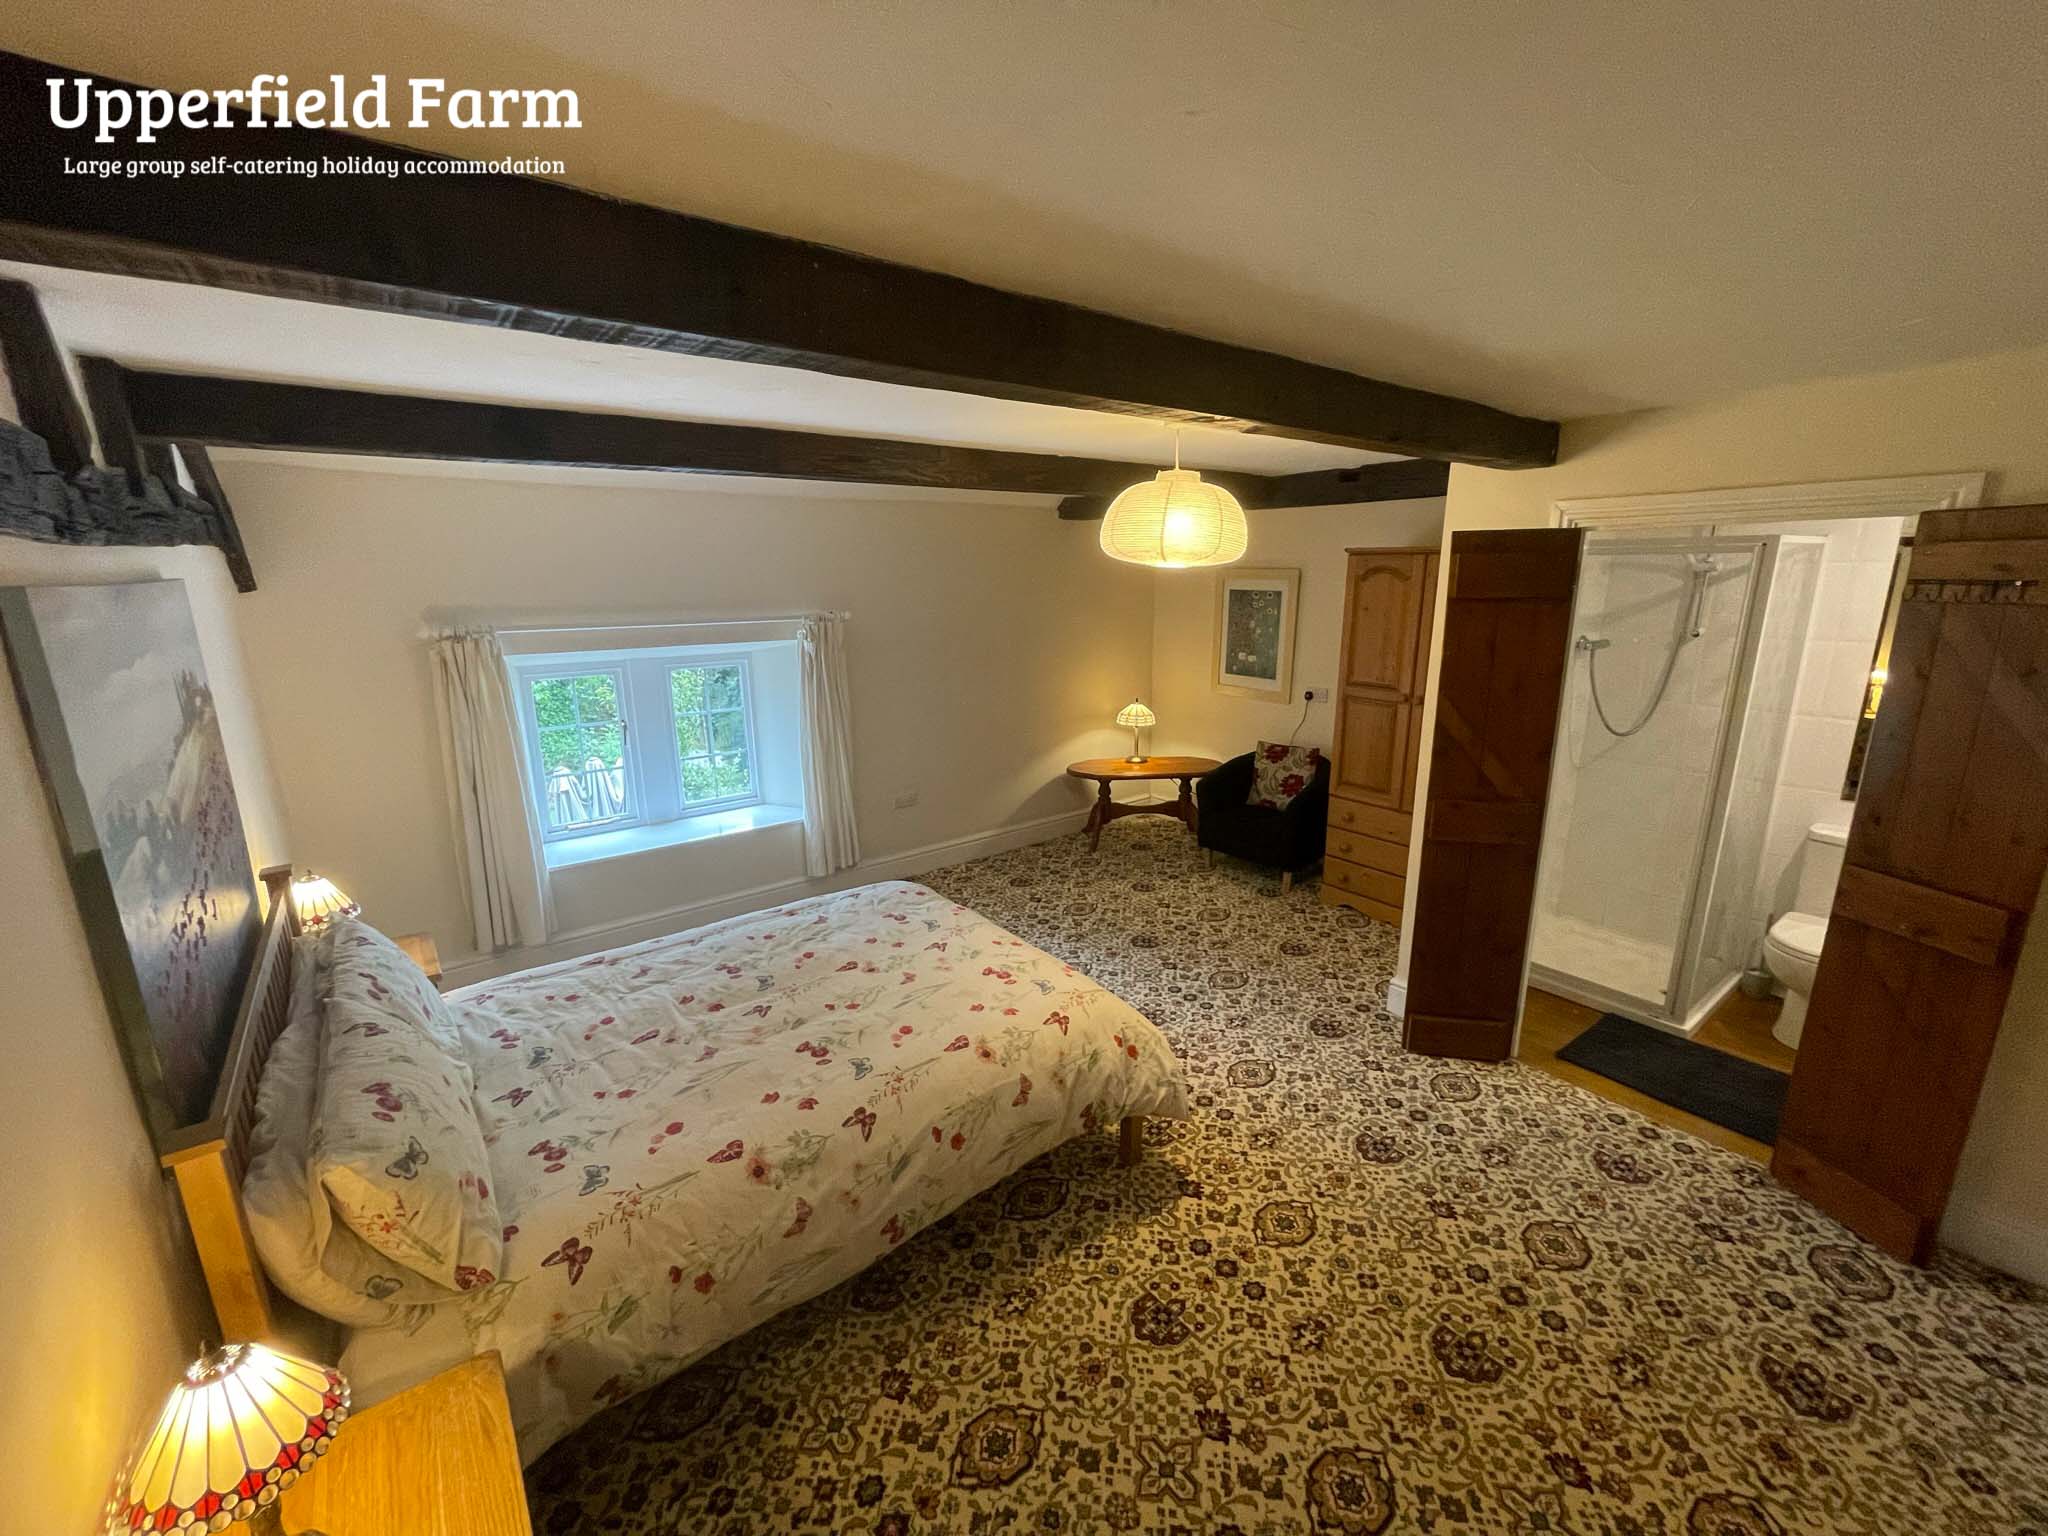 Upperfield Farm - Large group self-catering holiday accommodation